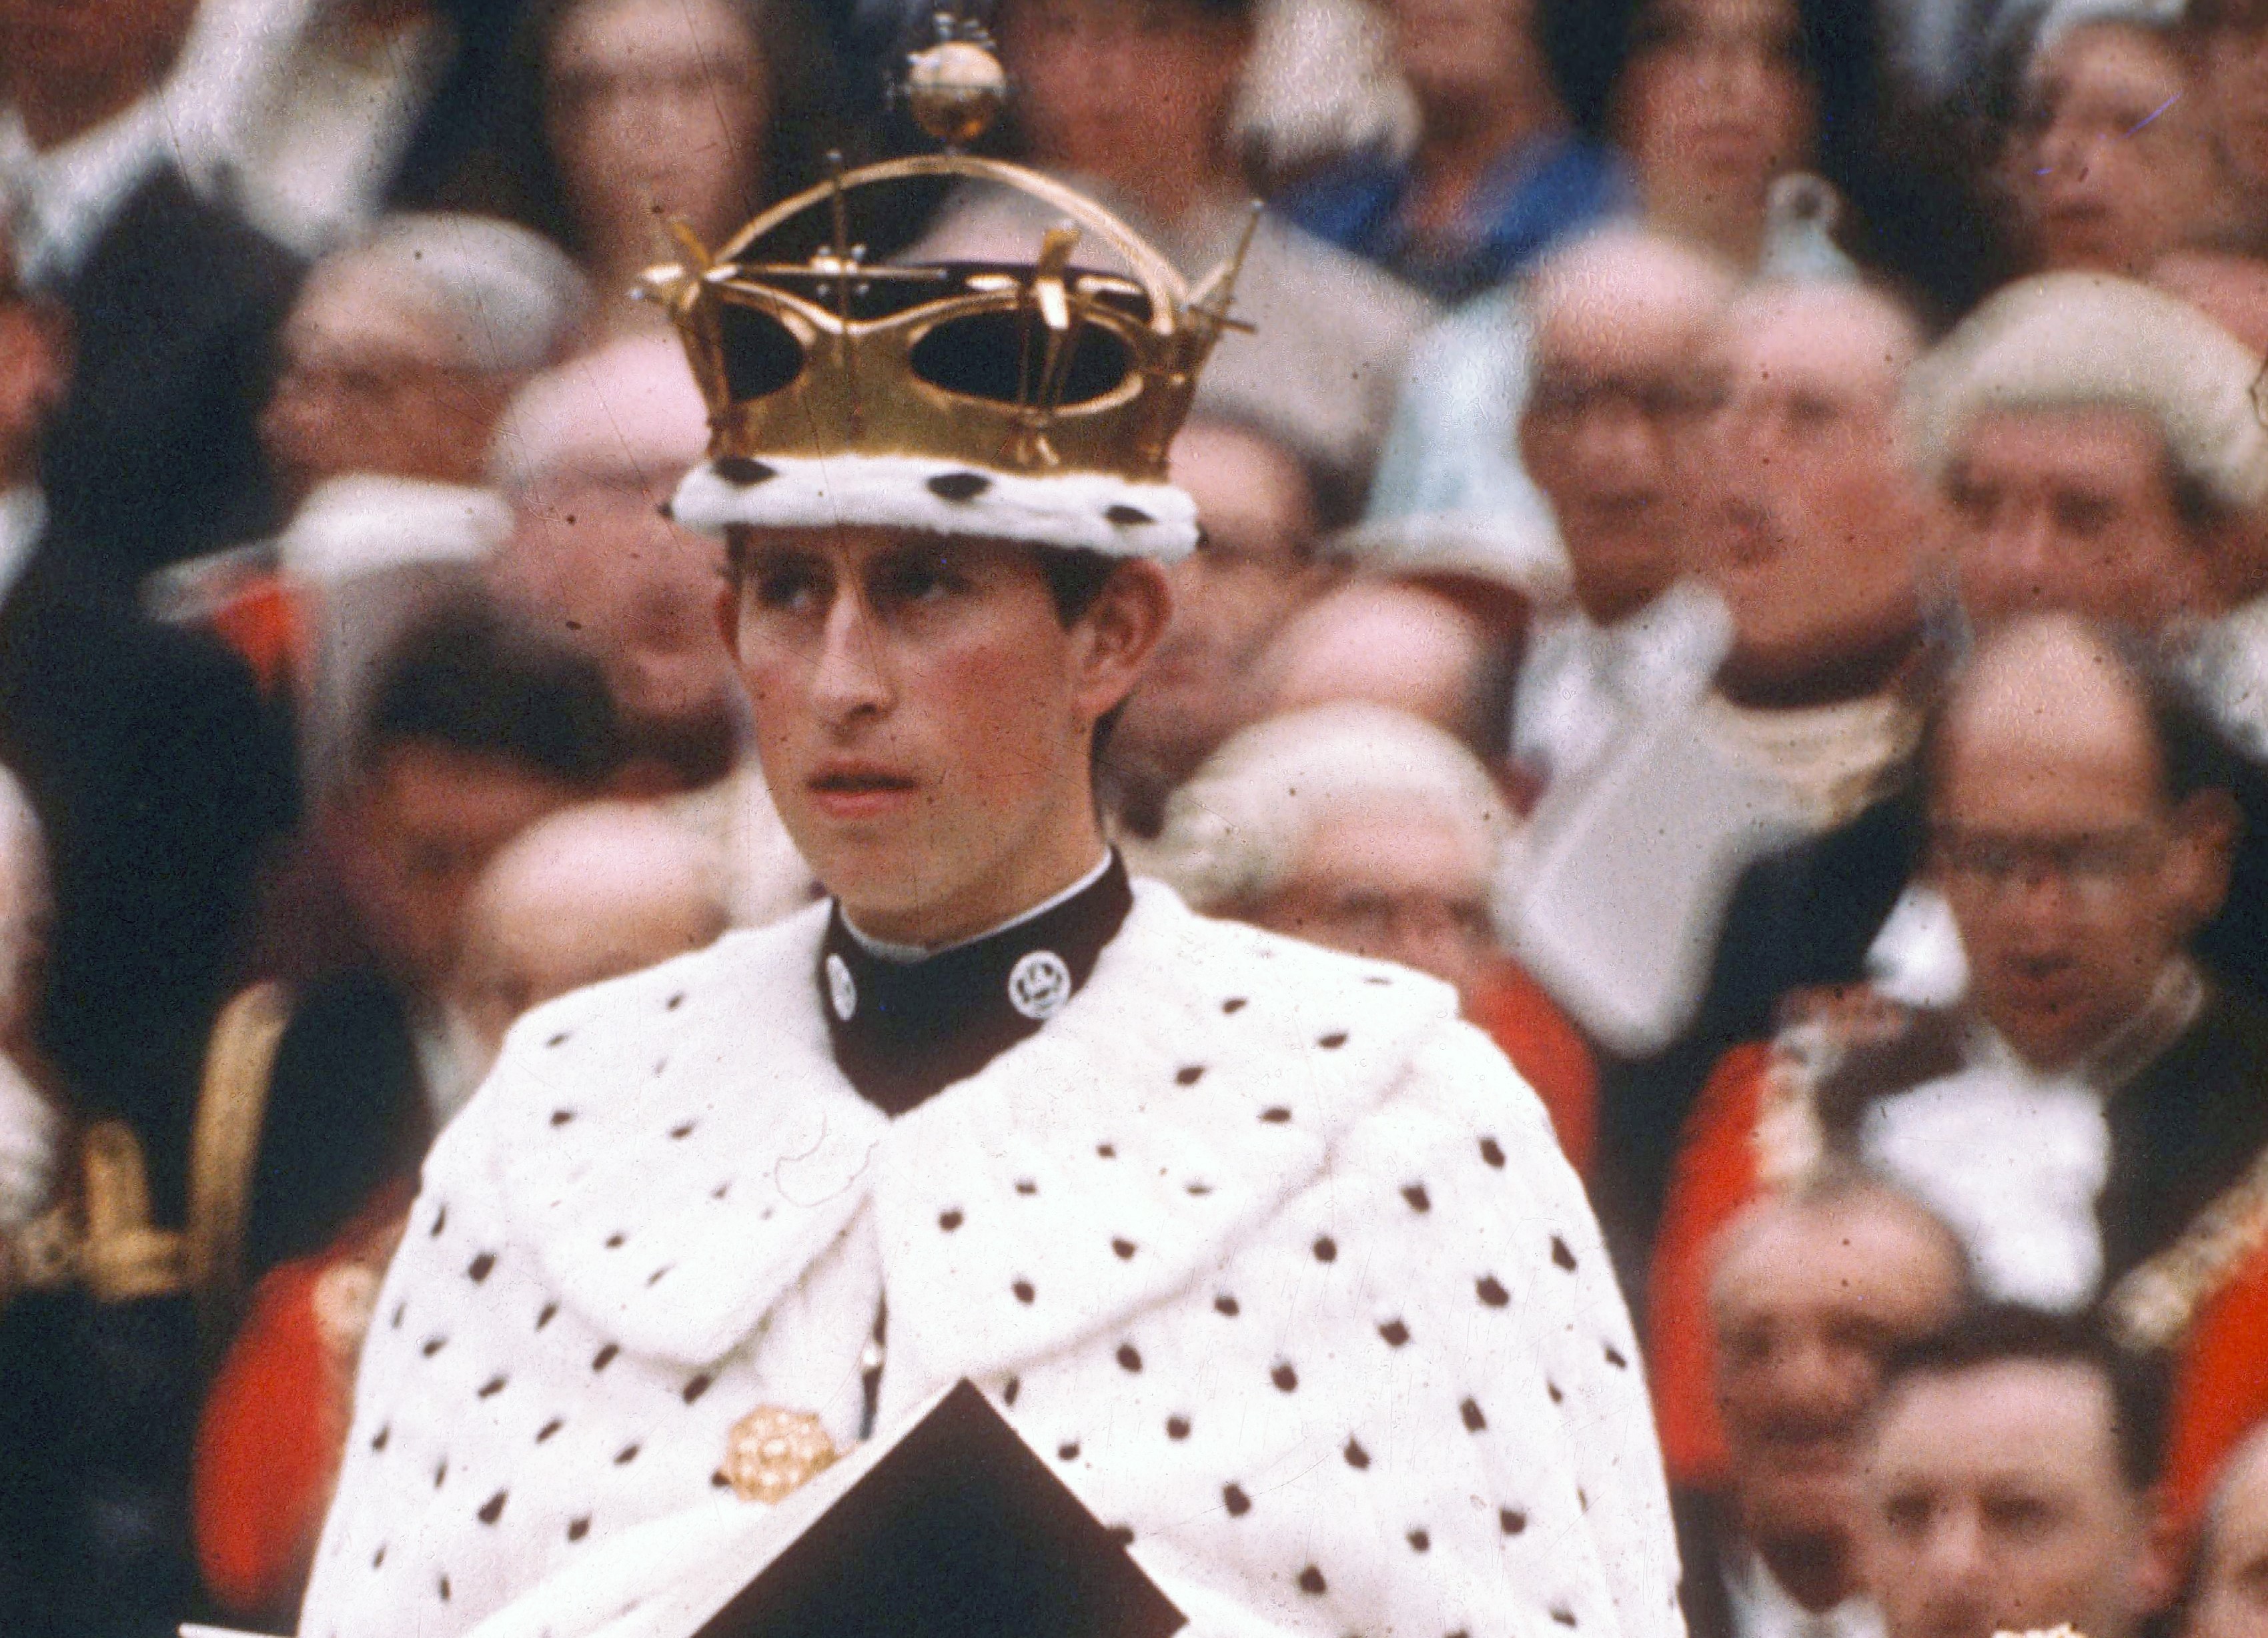 Prince Charles in his investiture robes at Caernarvon Castle on July 1, 1969